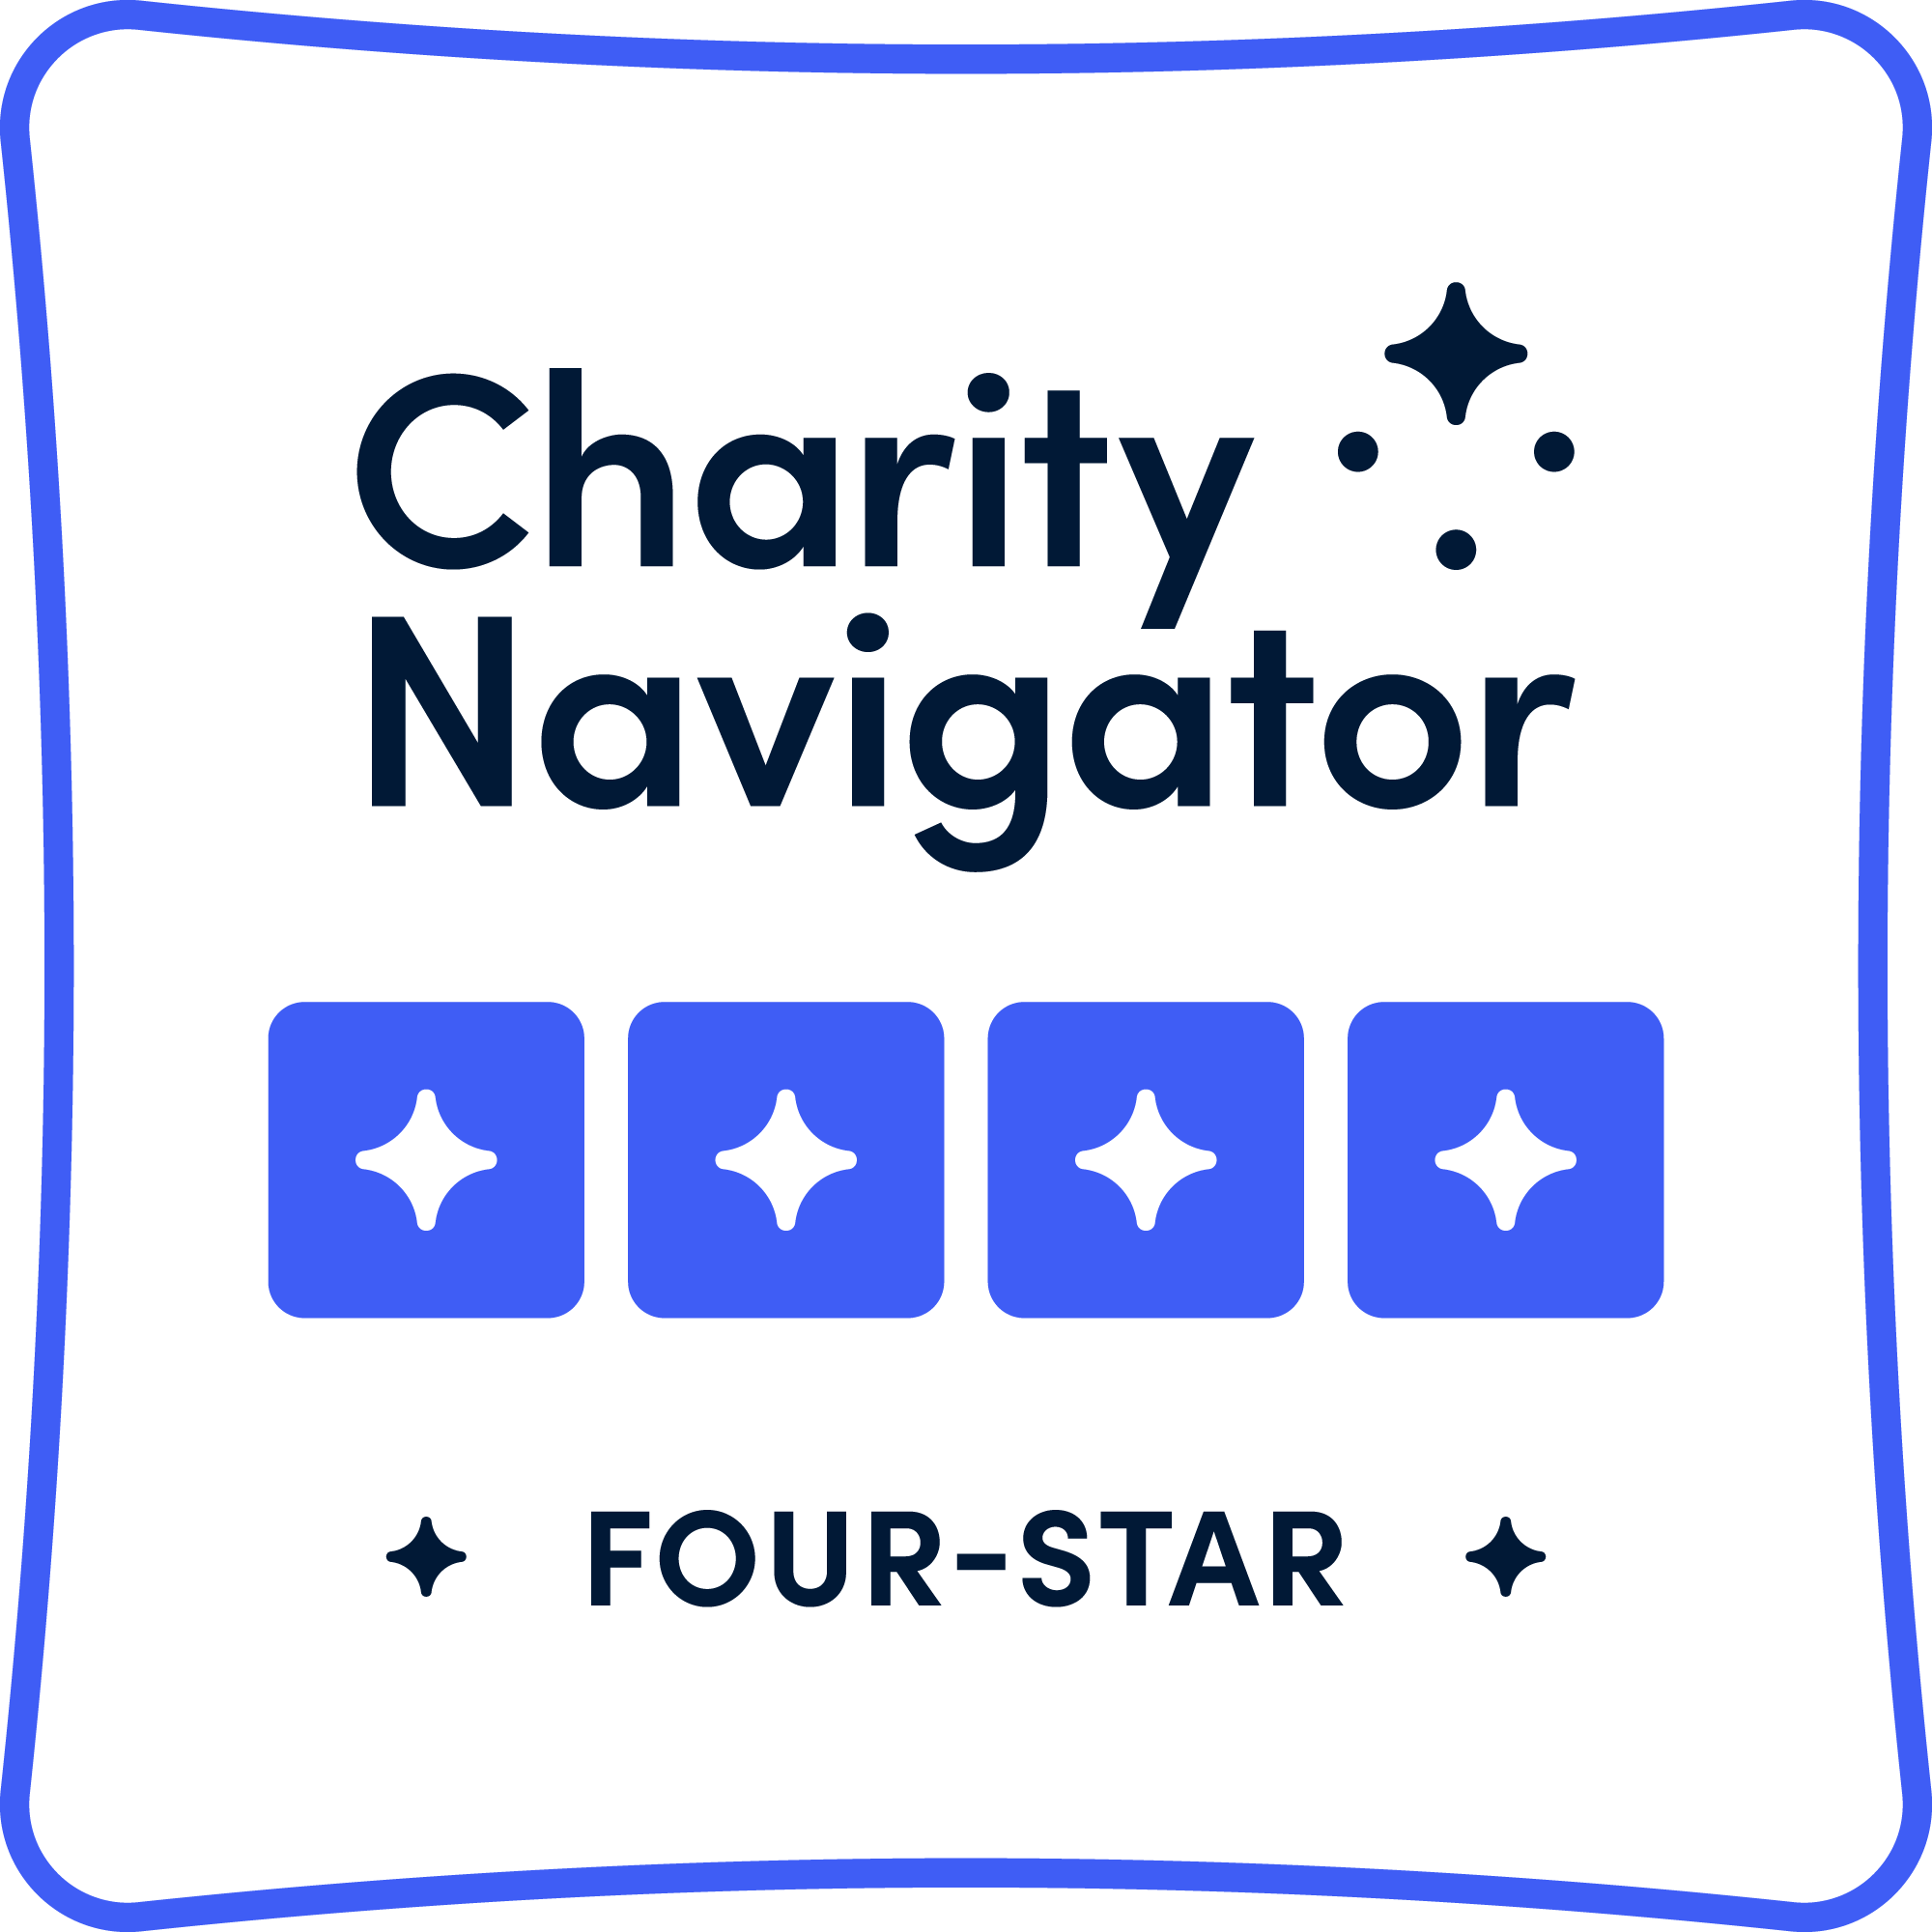 Four Star Rating from Charity Navigator